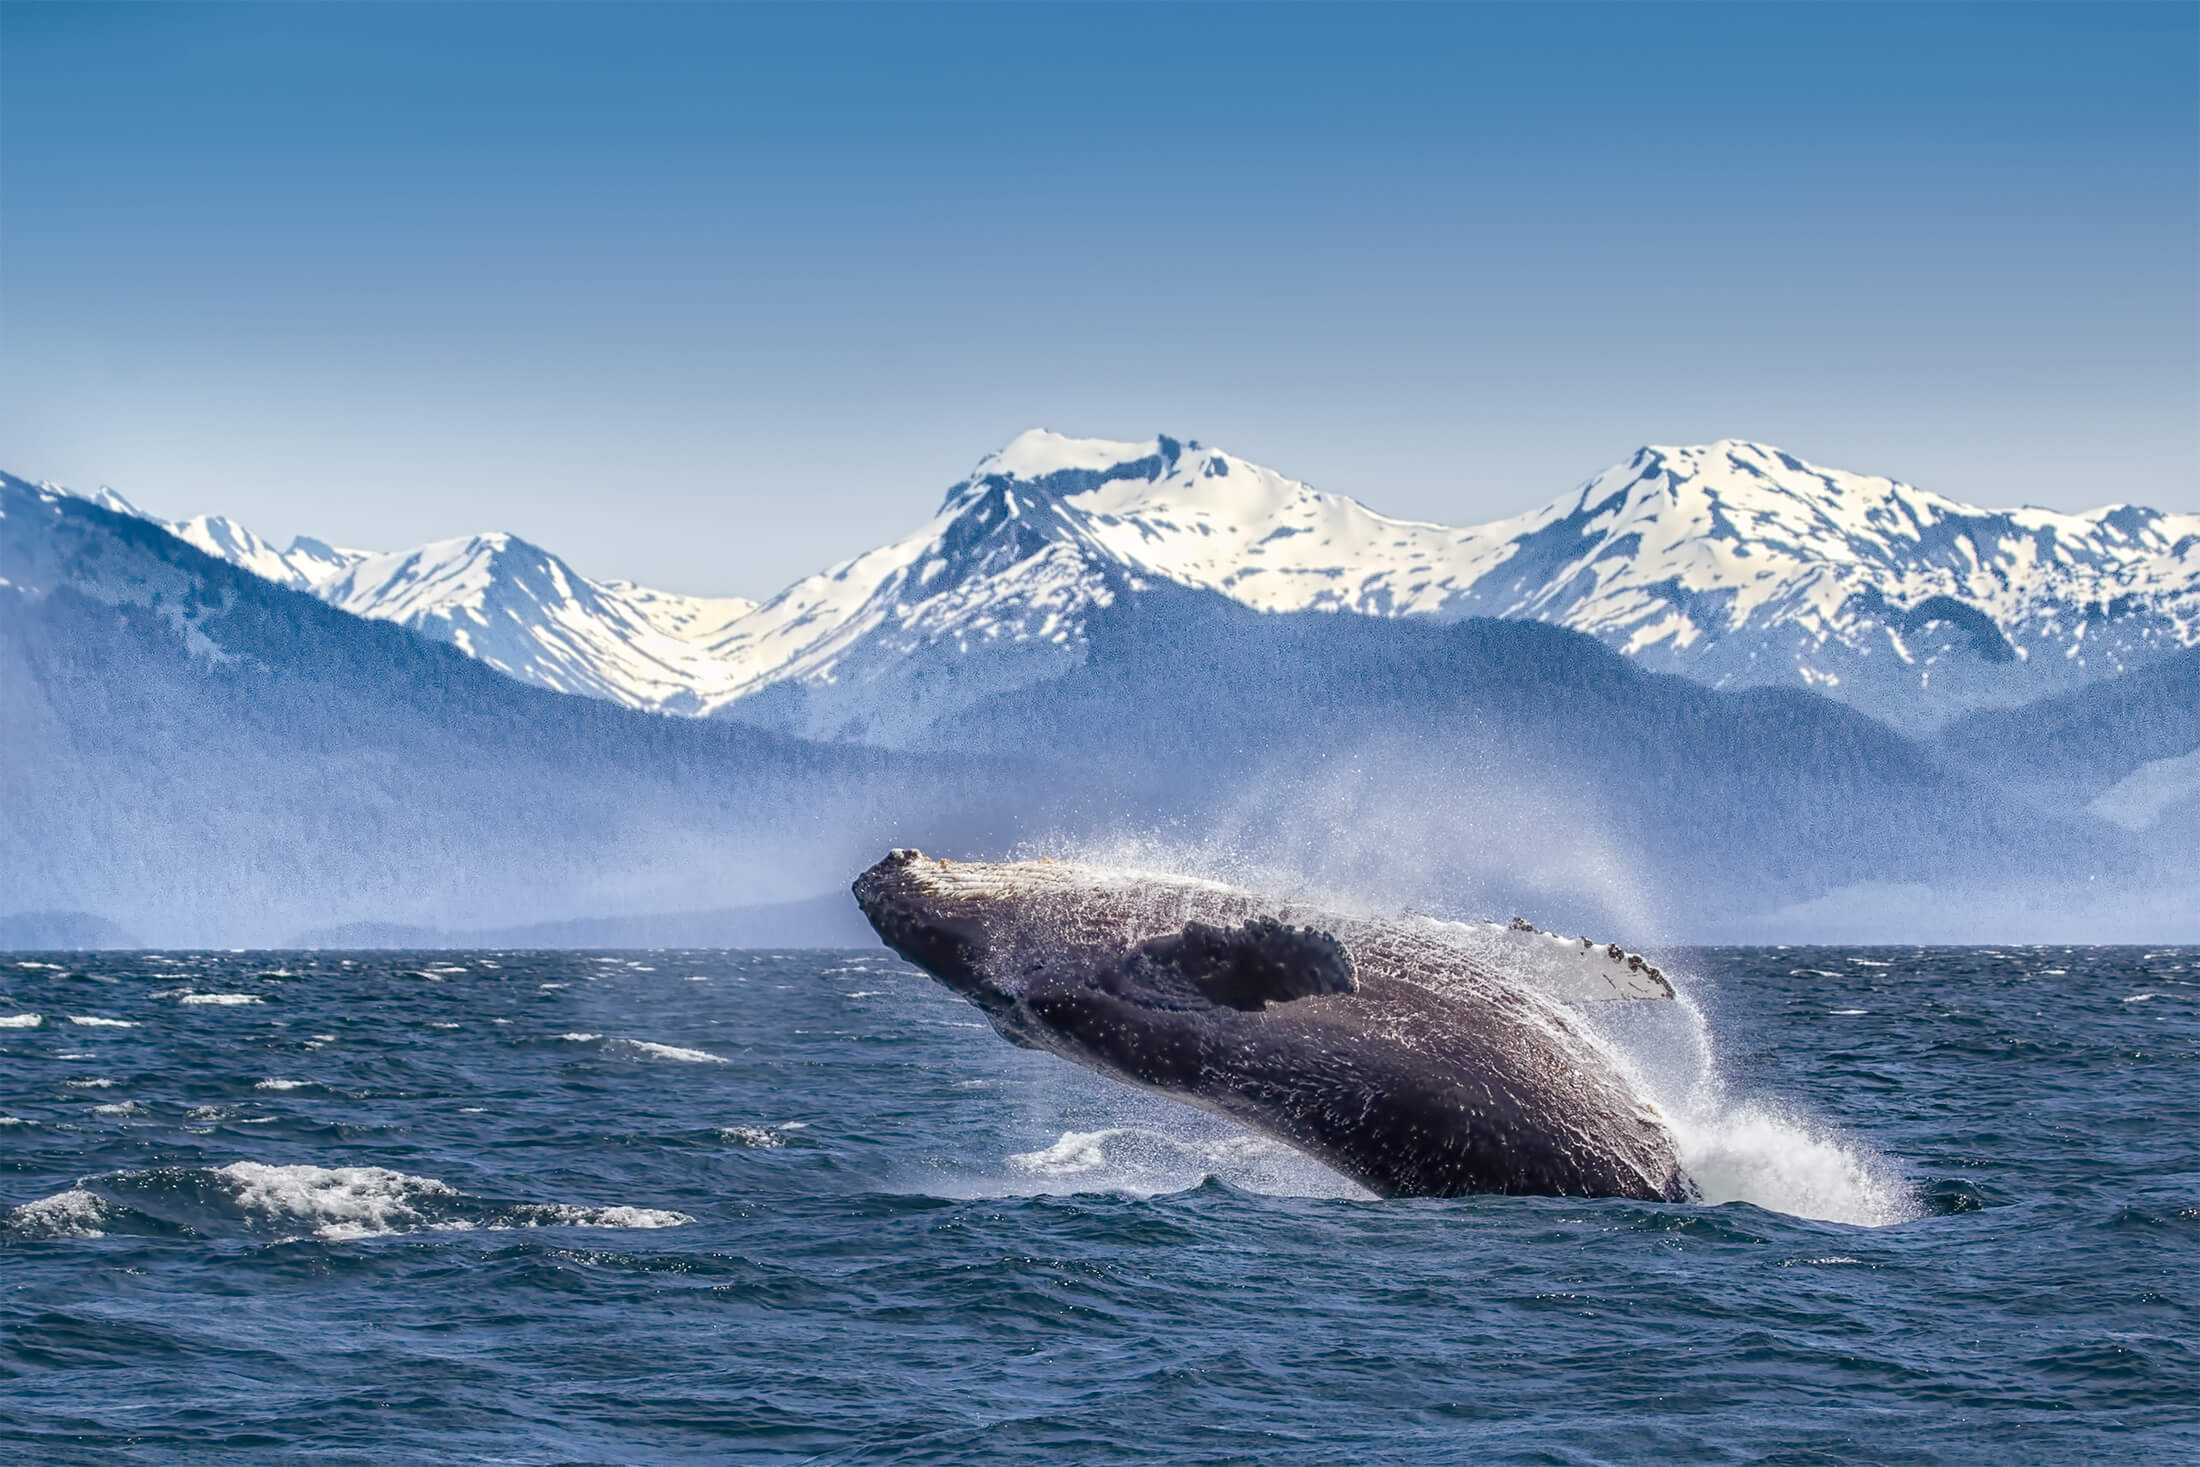 Whale jumping out of the ocean in Alaska